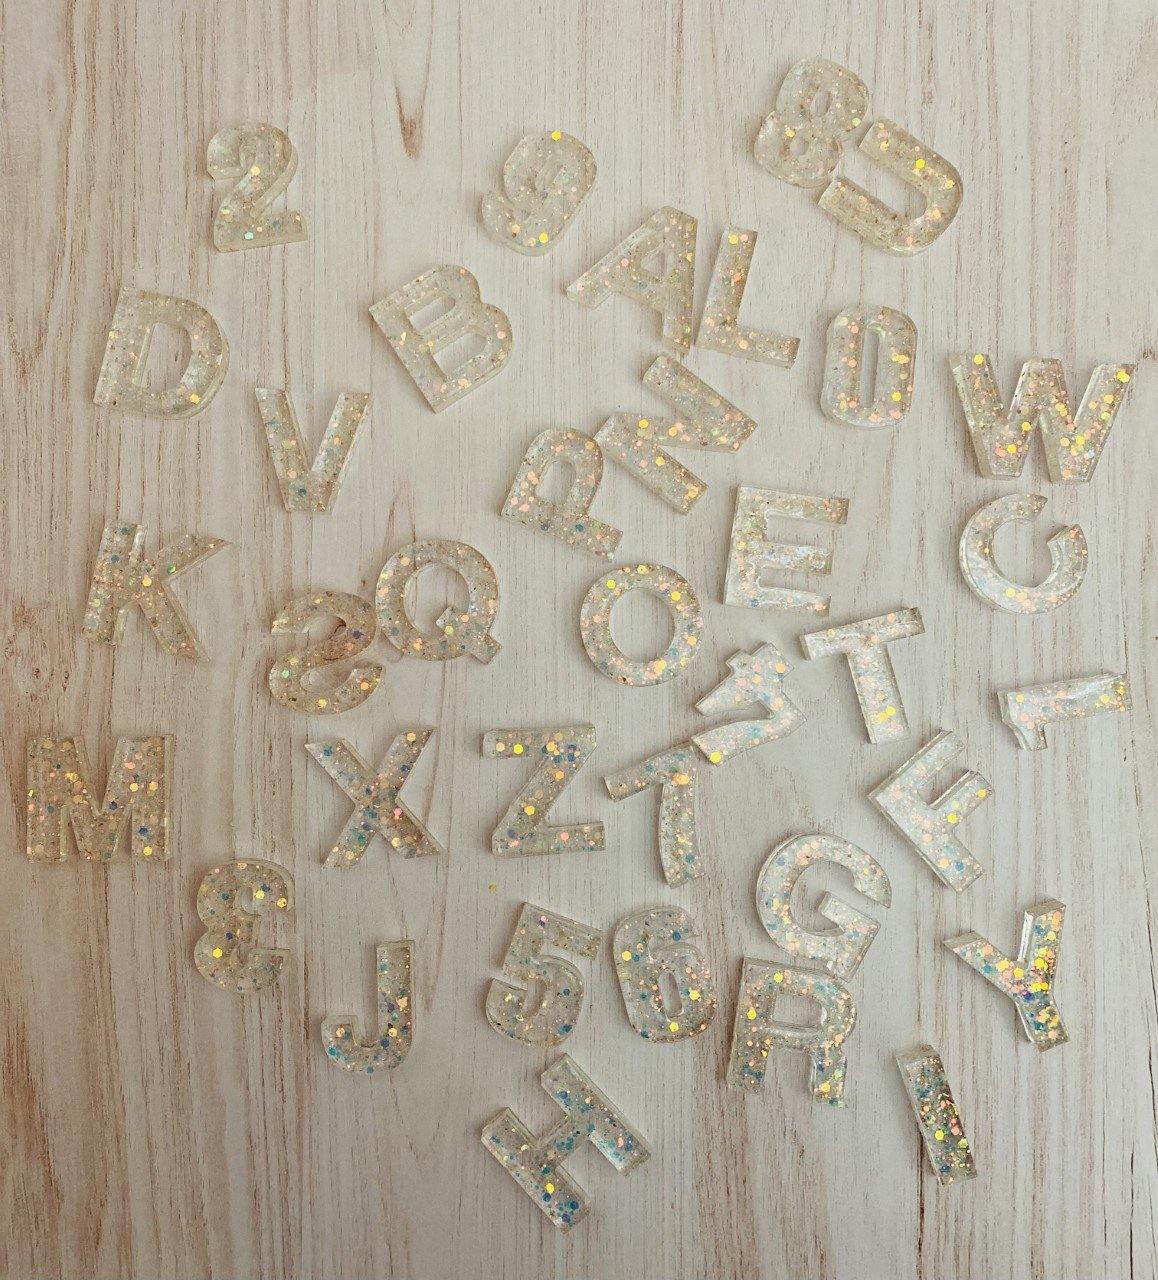 Handmade Resin Letters and Numbers - 2 Paper Sisters